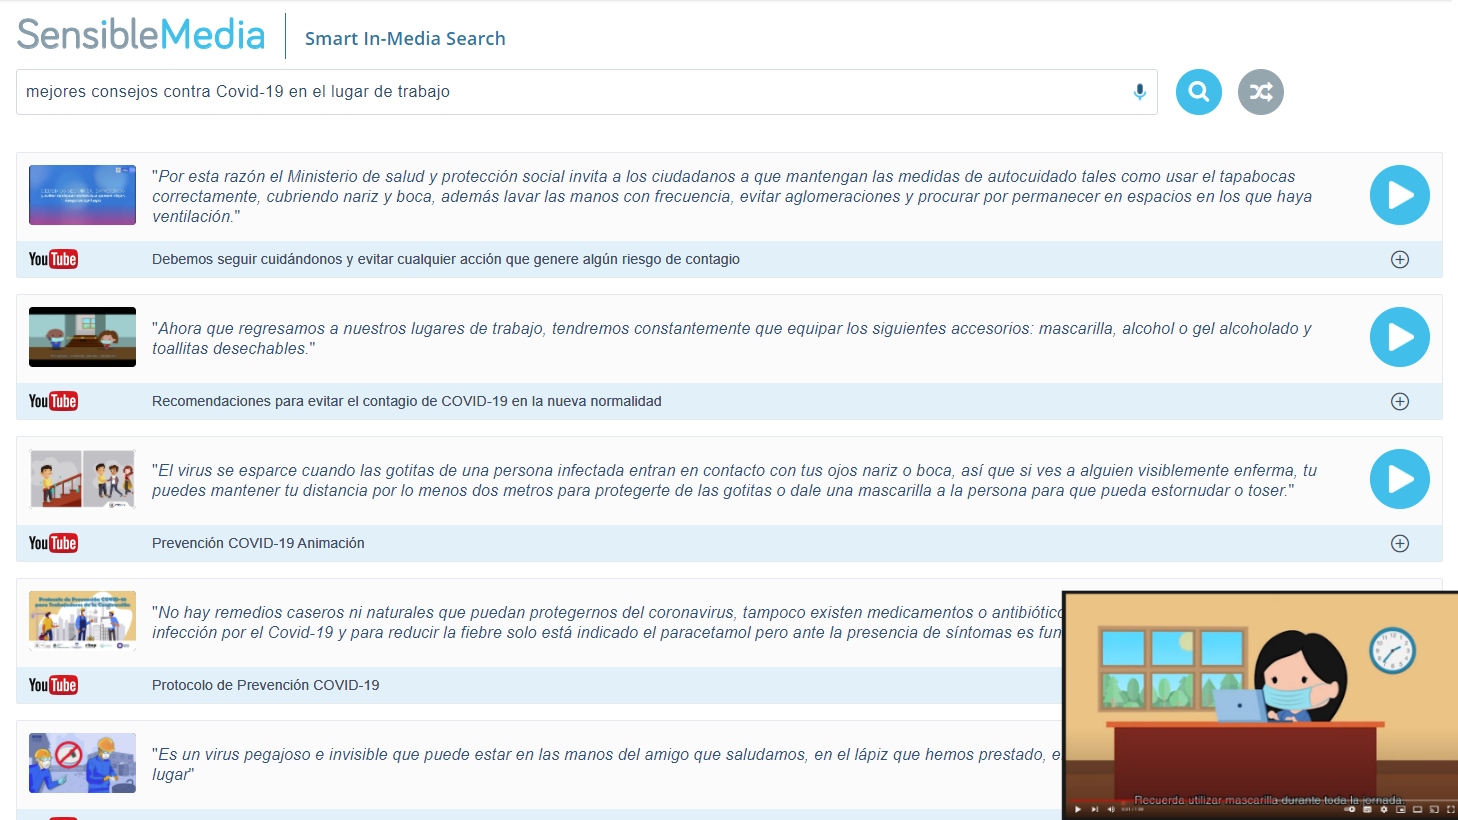 Using SensibleMedia to find safety recommendations against Covid-19 in the workplace.